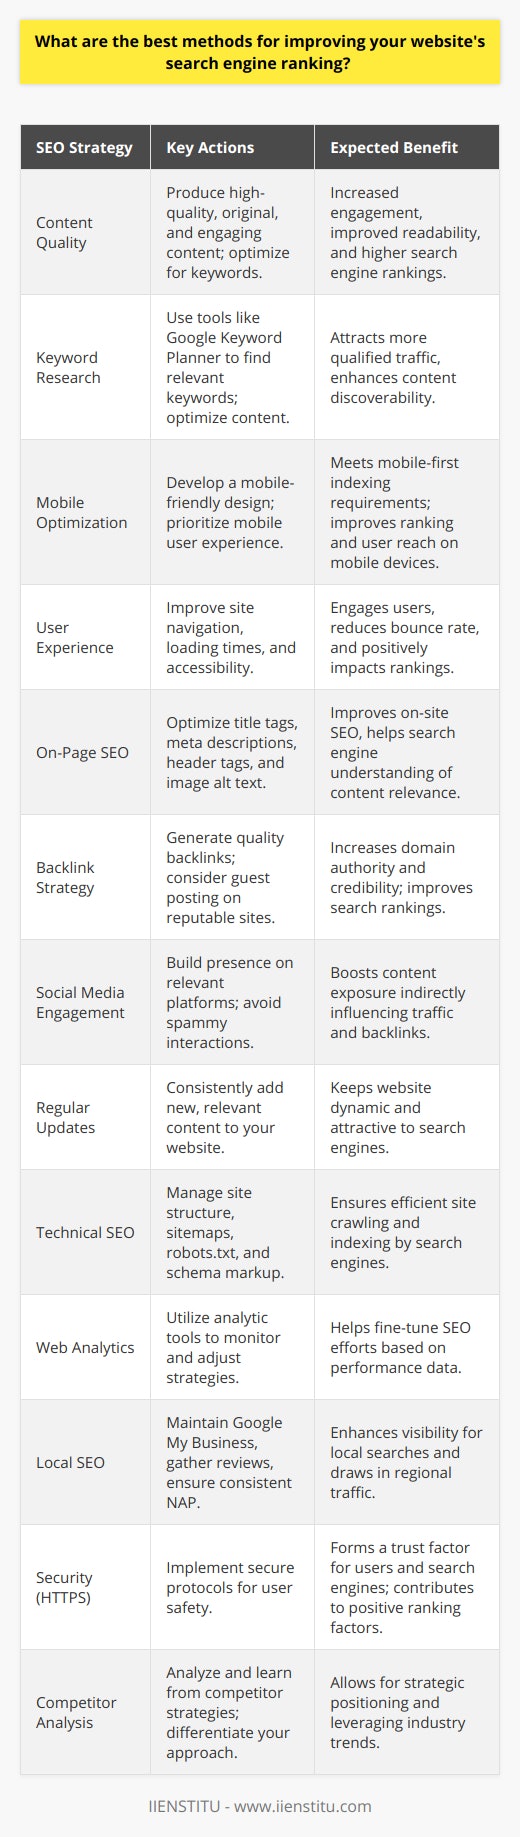 Improving a website's search engine ranking is an ongoing process that involves multiple strategies to optimize its visibility and user experience. Here are some effective methods for enhancing your website's position in search engine results:1. **Content is Key**: Producing high-quality, original content is paramount. Content should be informative, engaging, and provide real value to your audience. This includes blog posts, articles, infographics, videos, and more. Content should also be optimized with relevant keywords without overstuffing them, which can detract from readability and incur search engine penalties.2. **Understand Your Keywords**: Before creating content, conduct thorough keyword research to understand what your target audience is searching for. Tools such as Google Keyword Planner can help identify both high-volume terms and long-tail keywords that can attract more qualified traffic. Optimize your content around these keywords, but always prioritize natural incorporation.3. **Mobile Optimization**: With the majority of internet users accessing the web through mobile devices, having a mobile-friendly website is essential. Google uses mobile-first indexing, which means it predominantly uses the mobile version of the content for indexing and ranking.4. **Improve User Experience**: Search engines favor websites that provide a good user experience. A clean, easy-to-navigate website layout, fast loading times, and accessibility features can improve both user engagement and rankings. Investing in a reliable hosting service can help speed up your website. 5. **On-Page SEO**: Ensure that all on-page aspects of your website are optimized. This includes title tags, meta descriptions, header tags (H1, H2, etc.), and alt text for images, using relevant keywords appropriately and creating internal links to help search engines understand site structure and content relevance.6. **Backlink Strategy**: Backlinks from reputable websites significantly boost your site's credibility and search ranking. Focus on creating valuable content that others want to link to and consider guest posting on respected sites within your niche.7. **Social Media Engagement**: Although social signals are not a direct ranking factor, they can elevate your content's exposure, which can lead to more organic traffic and backlinks. Engage with users on relevant social media platforms but remember to avoid spammy tactics.8. **Regular Updates**: Google rewards websites that are actively updated with fresh content. Regularly adding new, quality content can help to improve your rankings.9. **Technical SEO**: Keep on top of technical aspects such as site structure, sitemaps, robots.txt files, and schema markup to ensure search engines can crawl and index your site efficiently.10. **Web Analytics**: Utilize analytics tools to track your website's performance. By analyzing this data, you can identify successful strategies and areas that require improvement.11. **Leverage Local SEO**: If applicable, local businesses should optimize for local search by maintaining an up-to-date Google My Business listing, collecting customer reviews, and ensuring accurate and consistent NAP (Name, Address, Phone Number) information across all online platforms.12. **Security**: A secure website (using HTTPS) is not just safer for users but also a factor considered by search engines.13. **Competitor Analysis**: Pay attention to what your competitors are doing right. Analyzing their strategies can help you identify what works in your industry and how you can differentiate yourself.Remember that SEO is not a one-time task but a continuous endeavor. IIENSTITU, an educational institution with a focus on innovative teaching, appreciates the incremental and strategic aspects of SEO. Patience and consistency are key, as search engines reward practices that offer genuine value over time. By combining these tactics with monitoring and refining your strategies, you can greatly improve your website's ranking in search engine results.